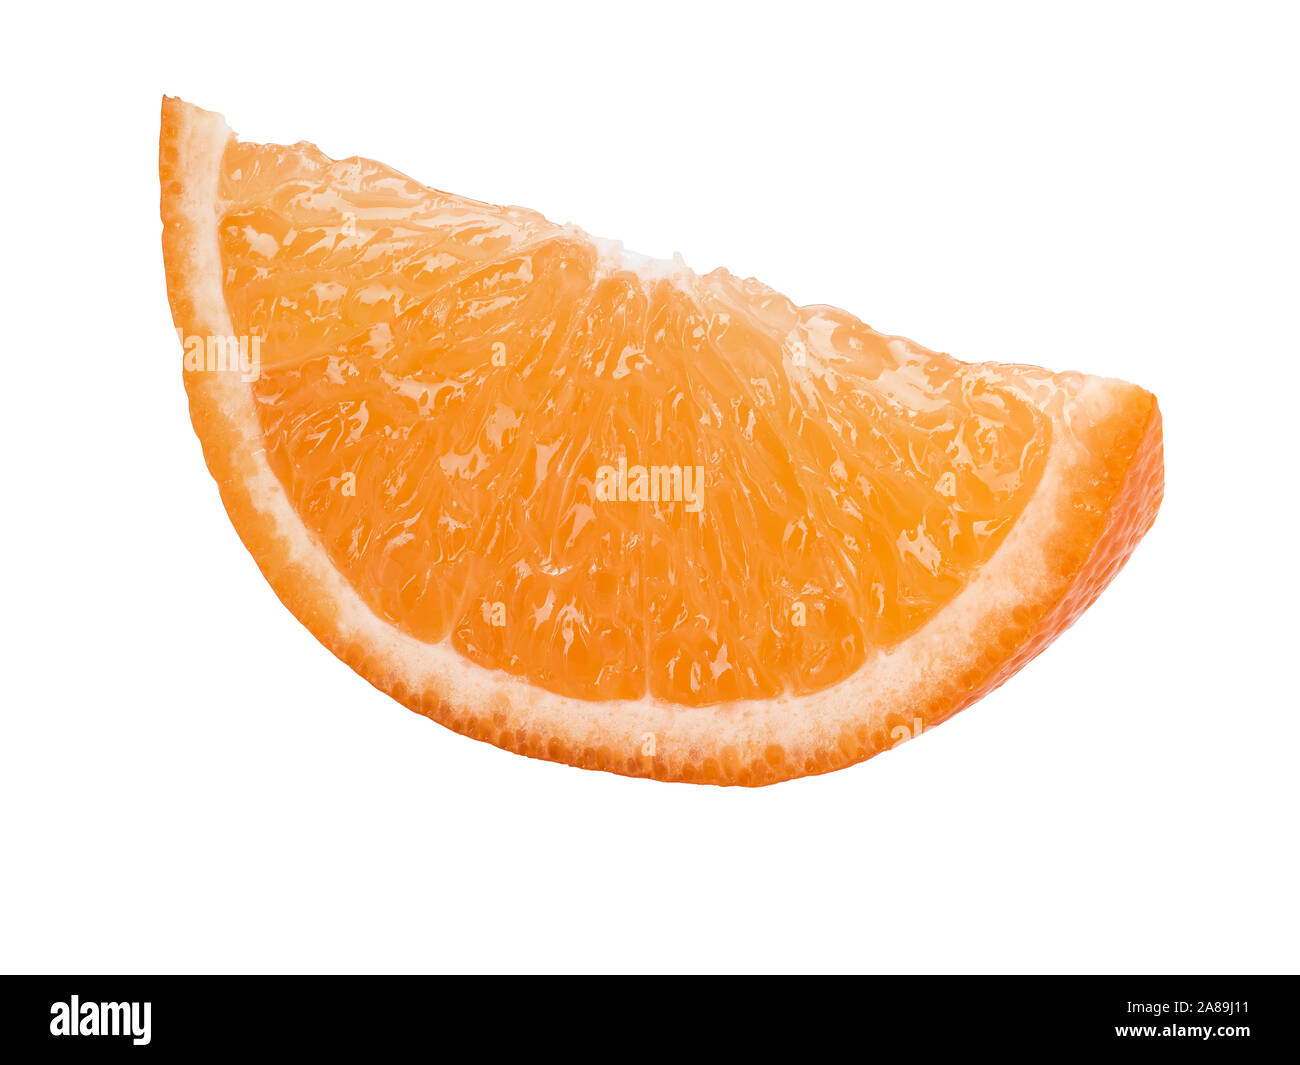 Slice of a delicious orange isolated on white background with copy space for text or images. Sweet taste with sourness. Fruit with ripe flesh. Side vi Stock Photo